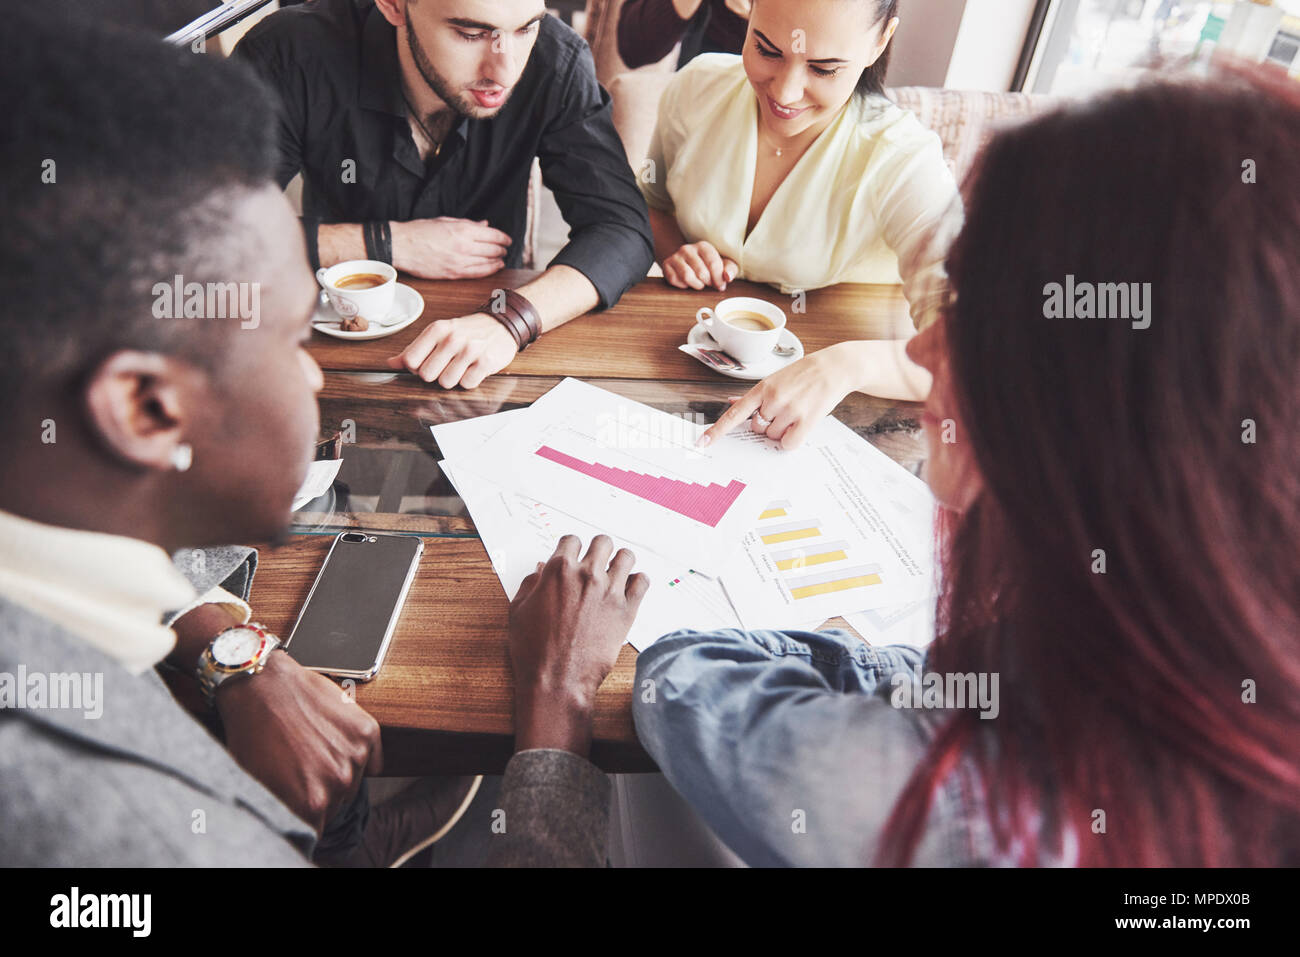 Startup Diversity Teamwork Brainstorming Meeting Concept. Business Team Coworkers Sharing World Economy Report Document Laptop.People Working Planning Start Up.Group Young Hipsters Discussing Cafe Stock Photo